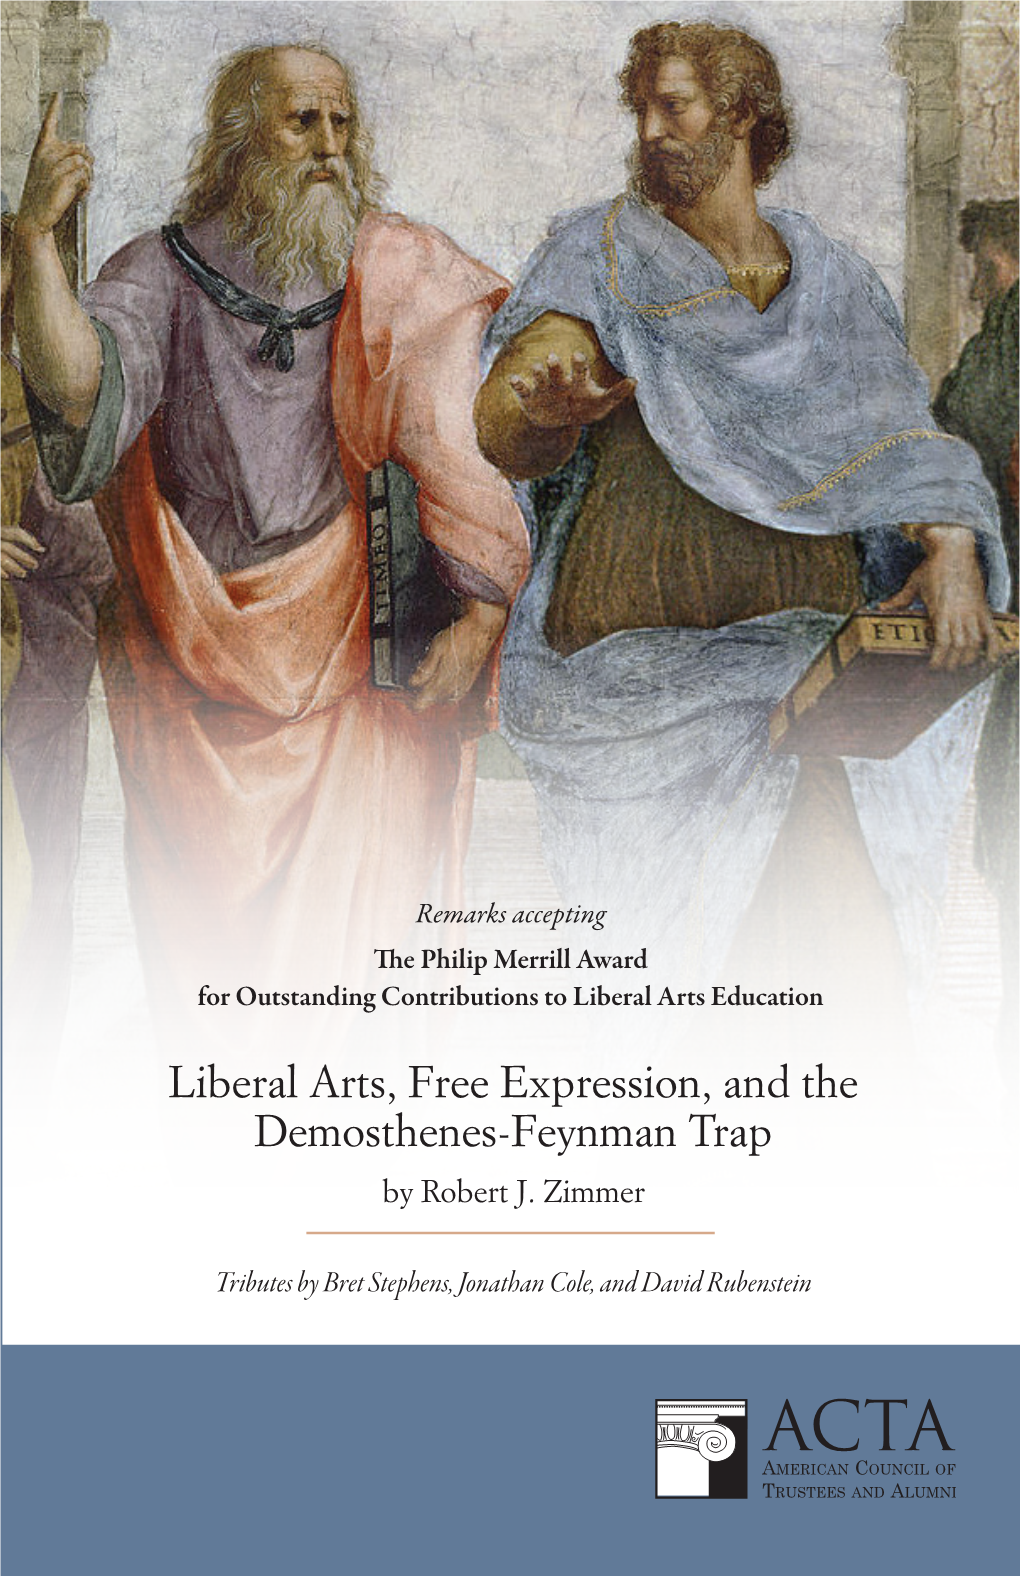 Liberal Arts, Free Expression, and the Demosthenes-Feynman Trap by Robert J